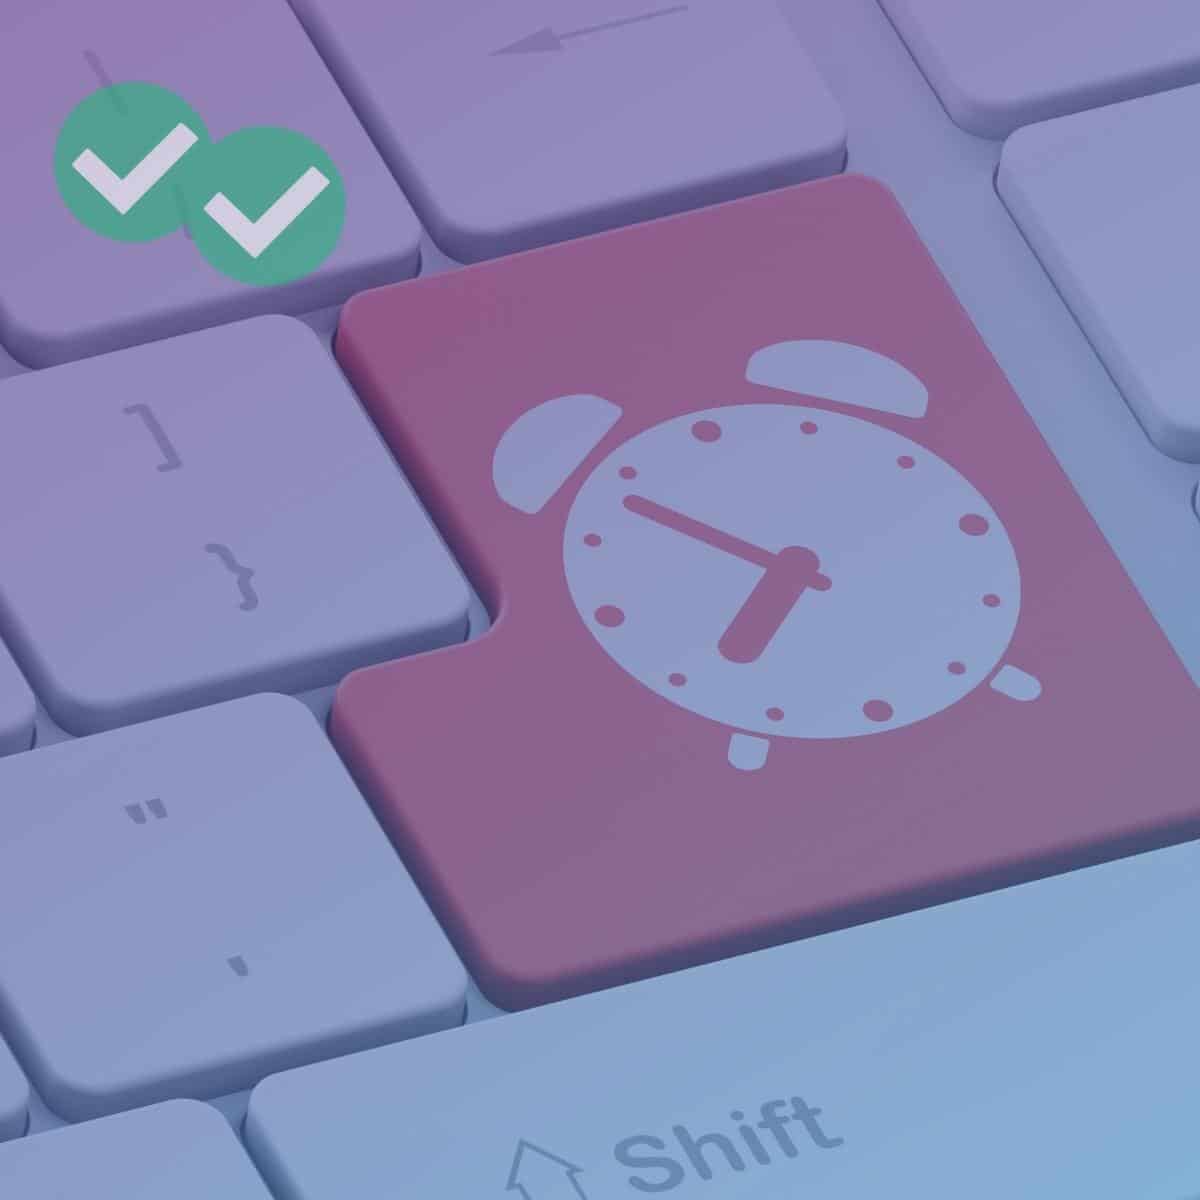 Enter button on a keyboard with an alarm clock